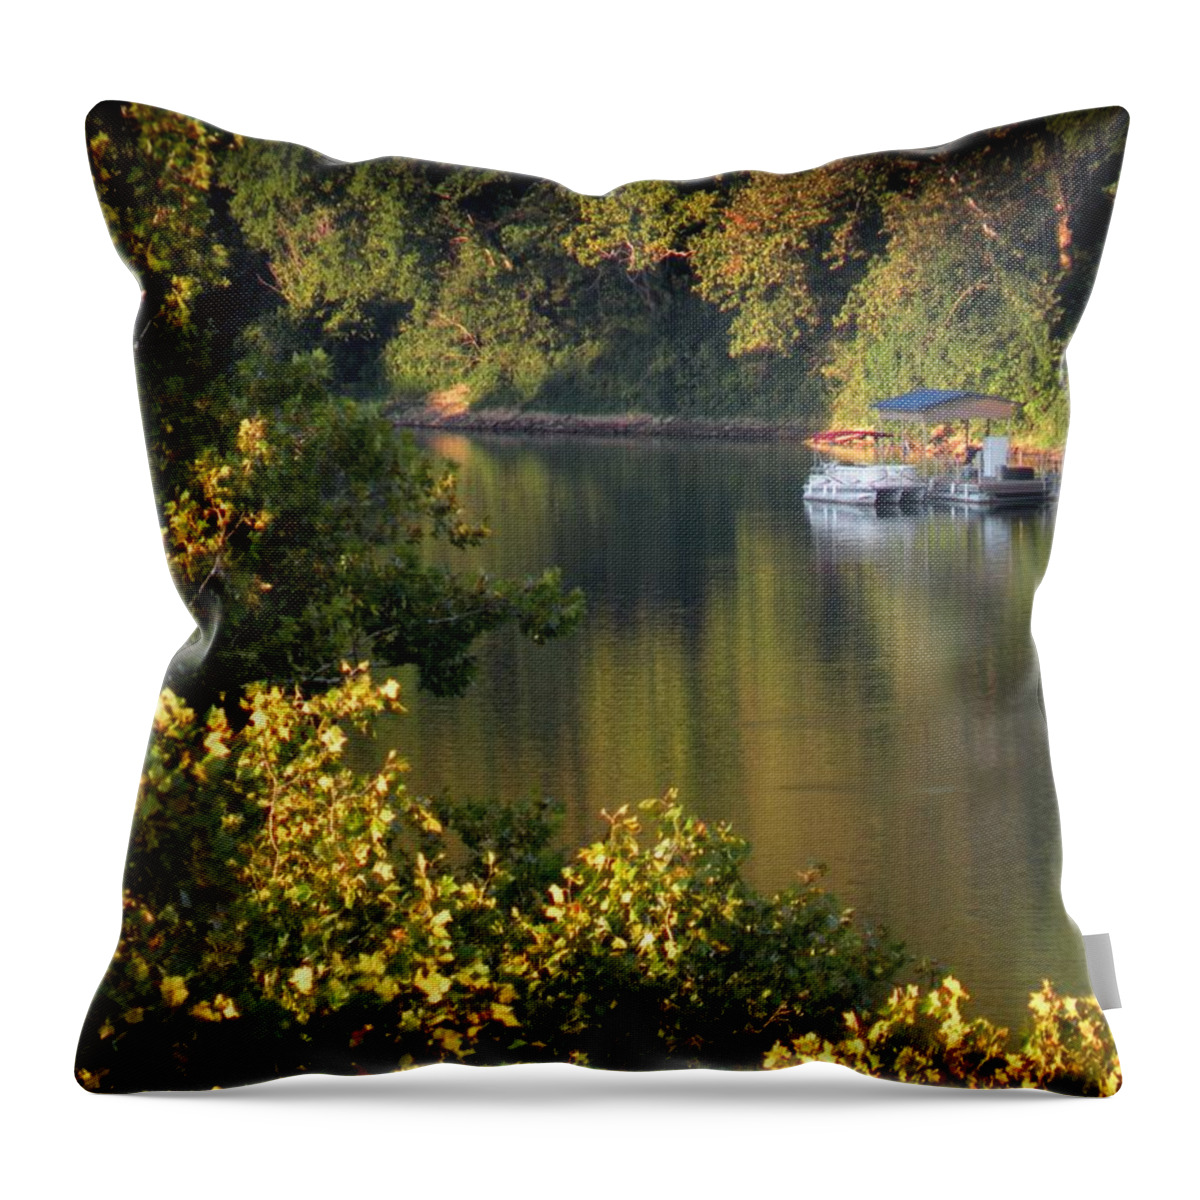 Tranquility Throw Pillow featuring the photograph Tranquility by Janis Kirstein